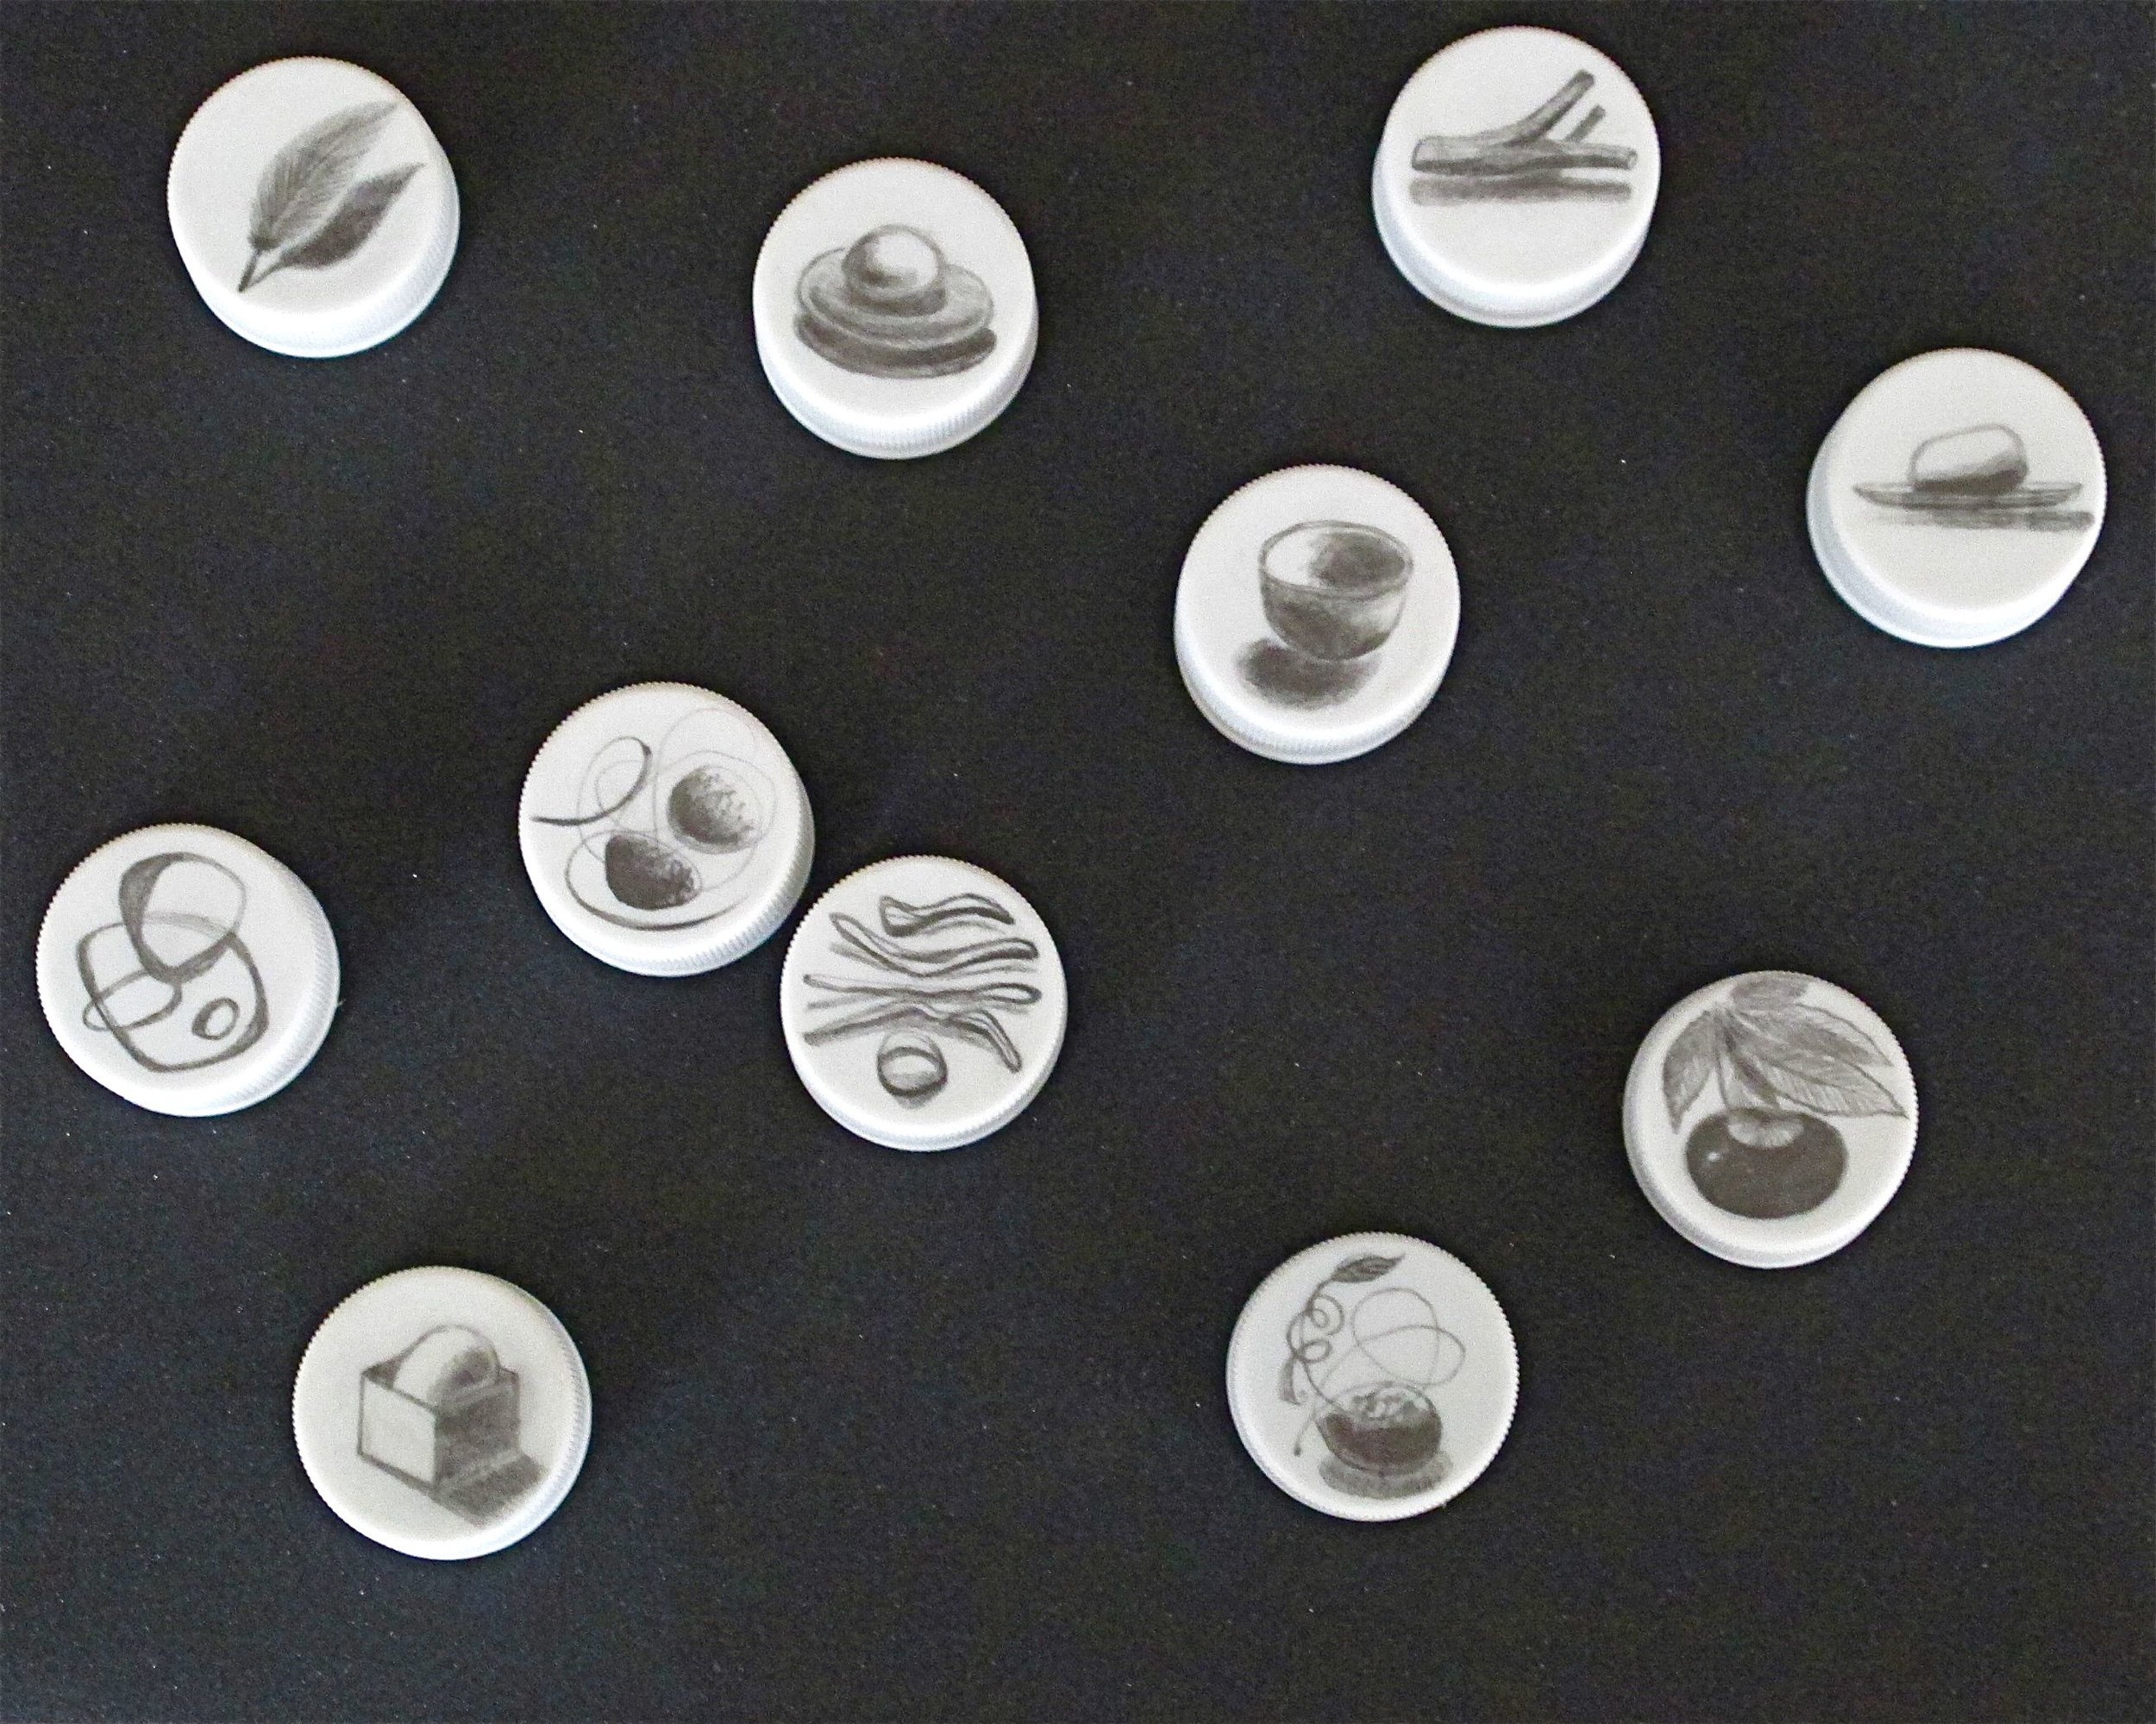    Commonalities, (Right)  , 2010 Graphite on Bottle Caps 11” x 9” shadow box 